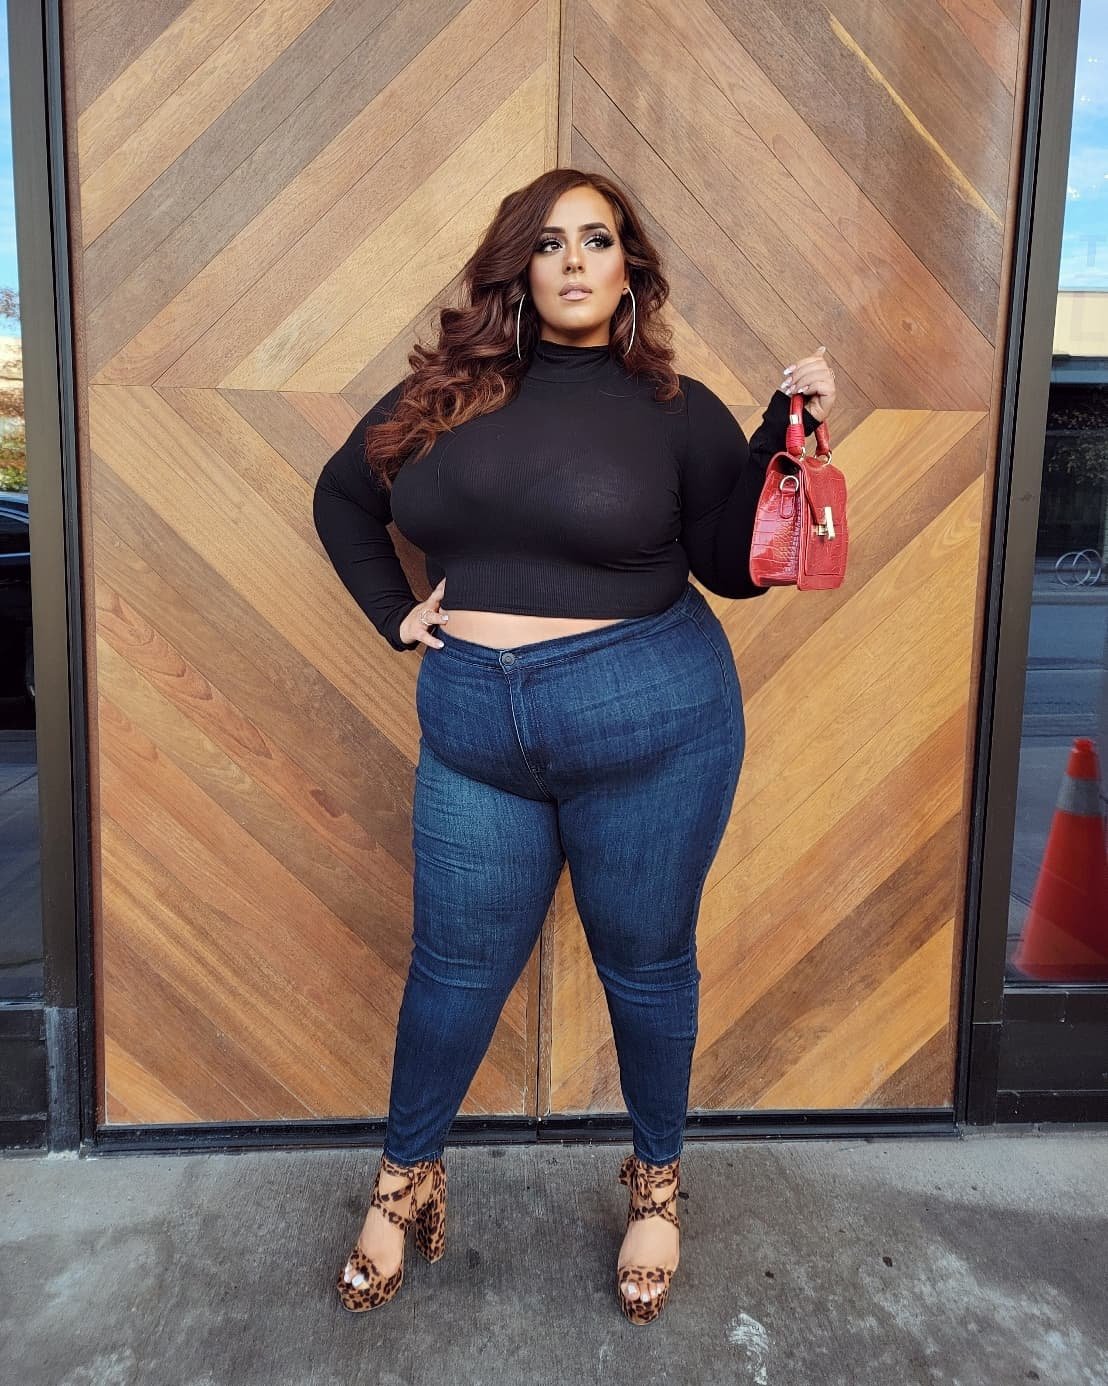 Plus Size Influencer, Olivia Shows Toronto How To Be Sexy and